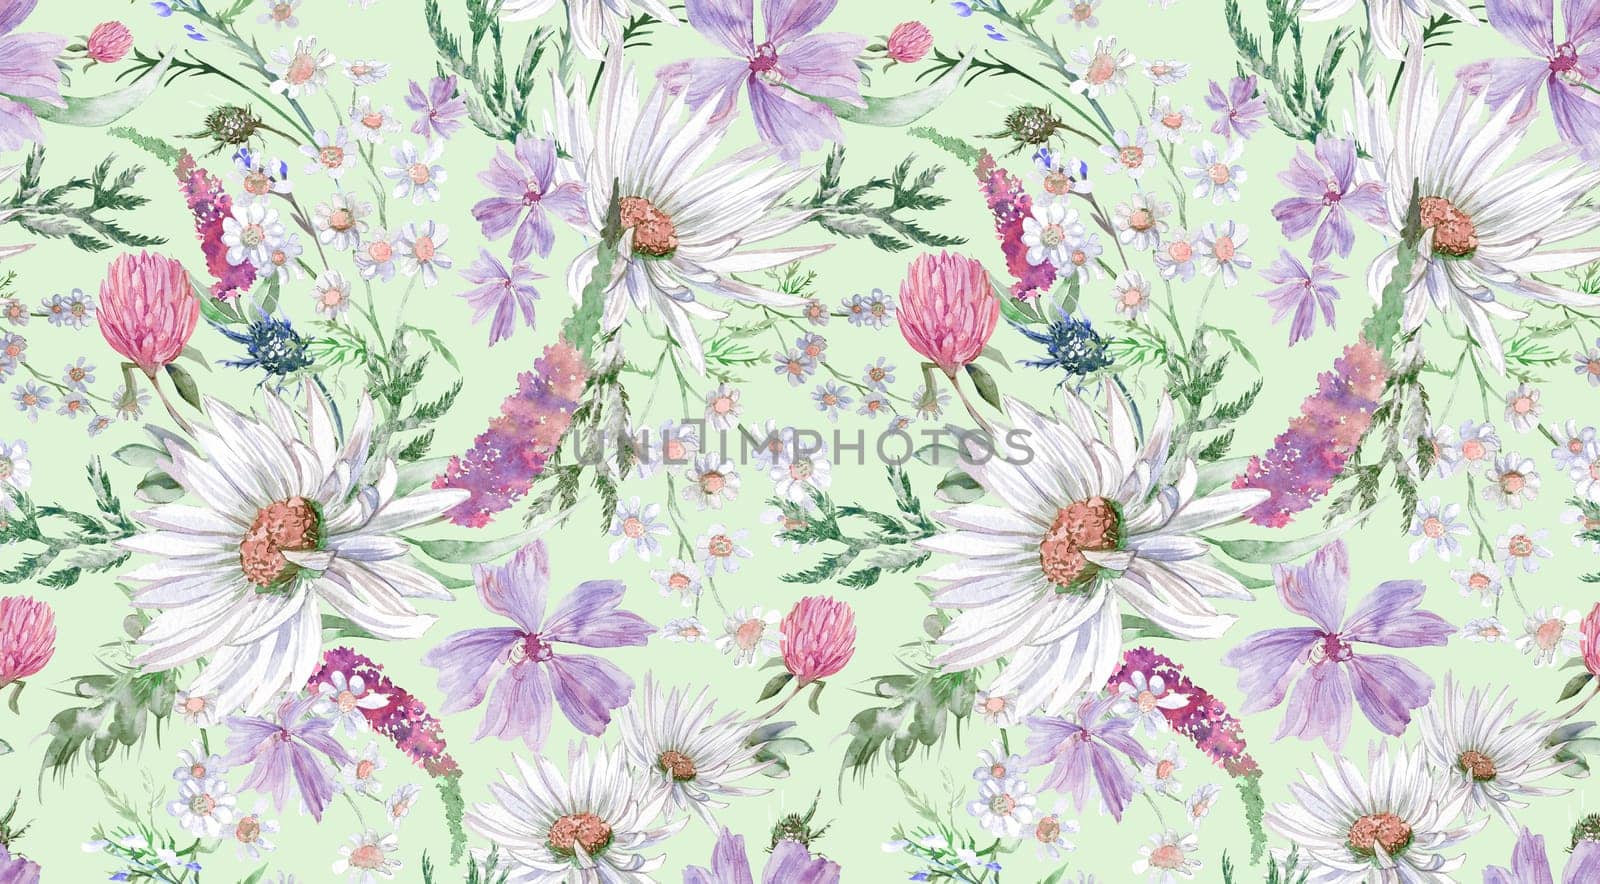 Summer seamless pattern with daisy clover flowers and other wildflowers drawn